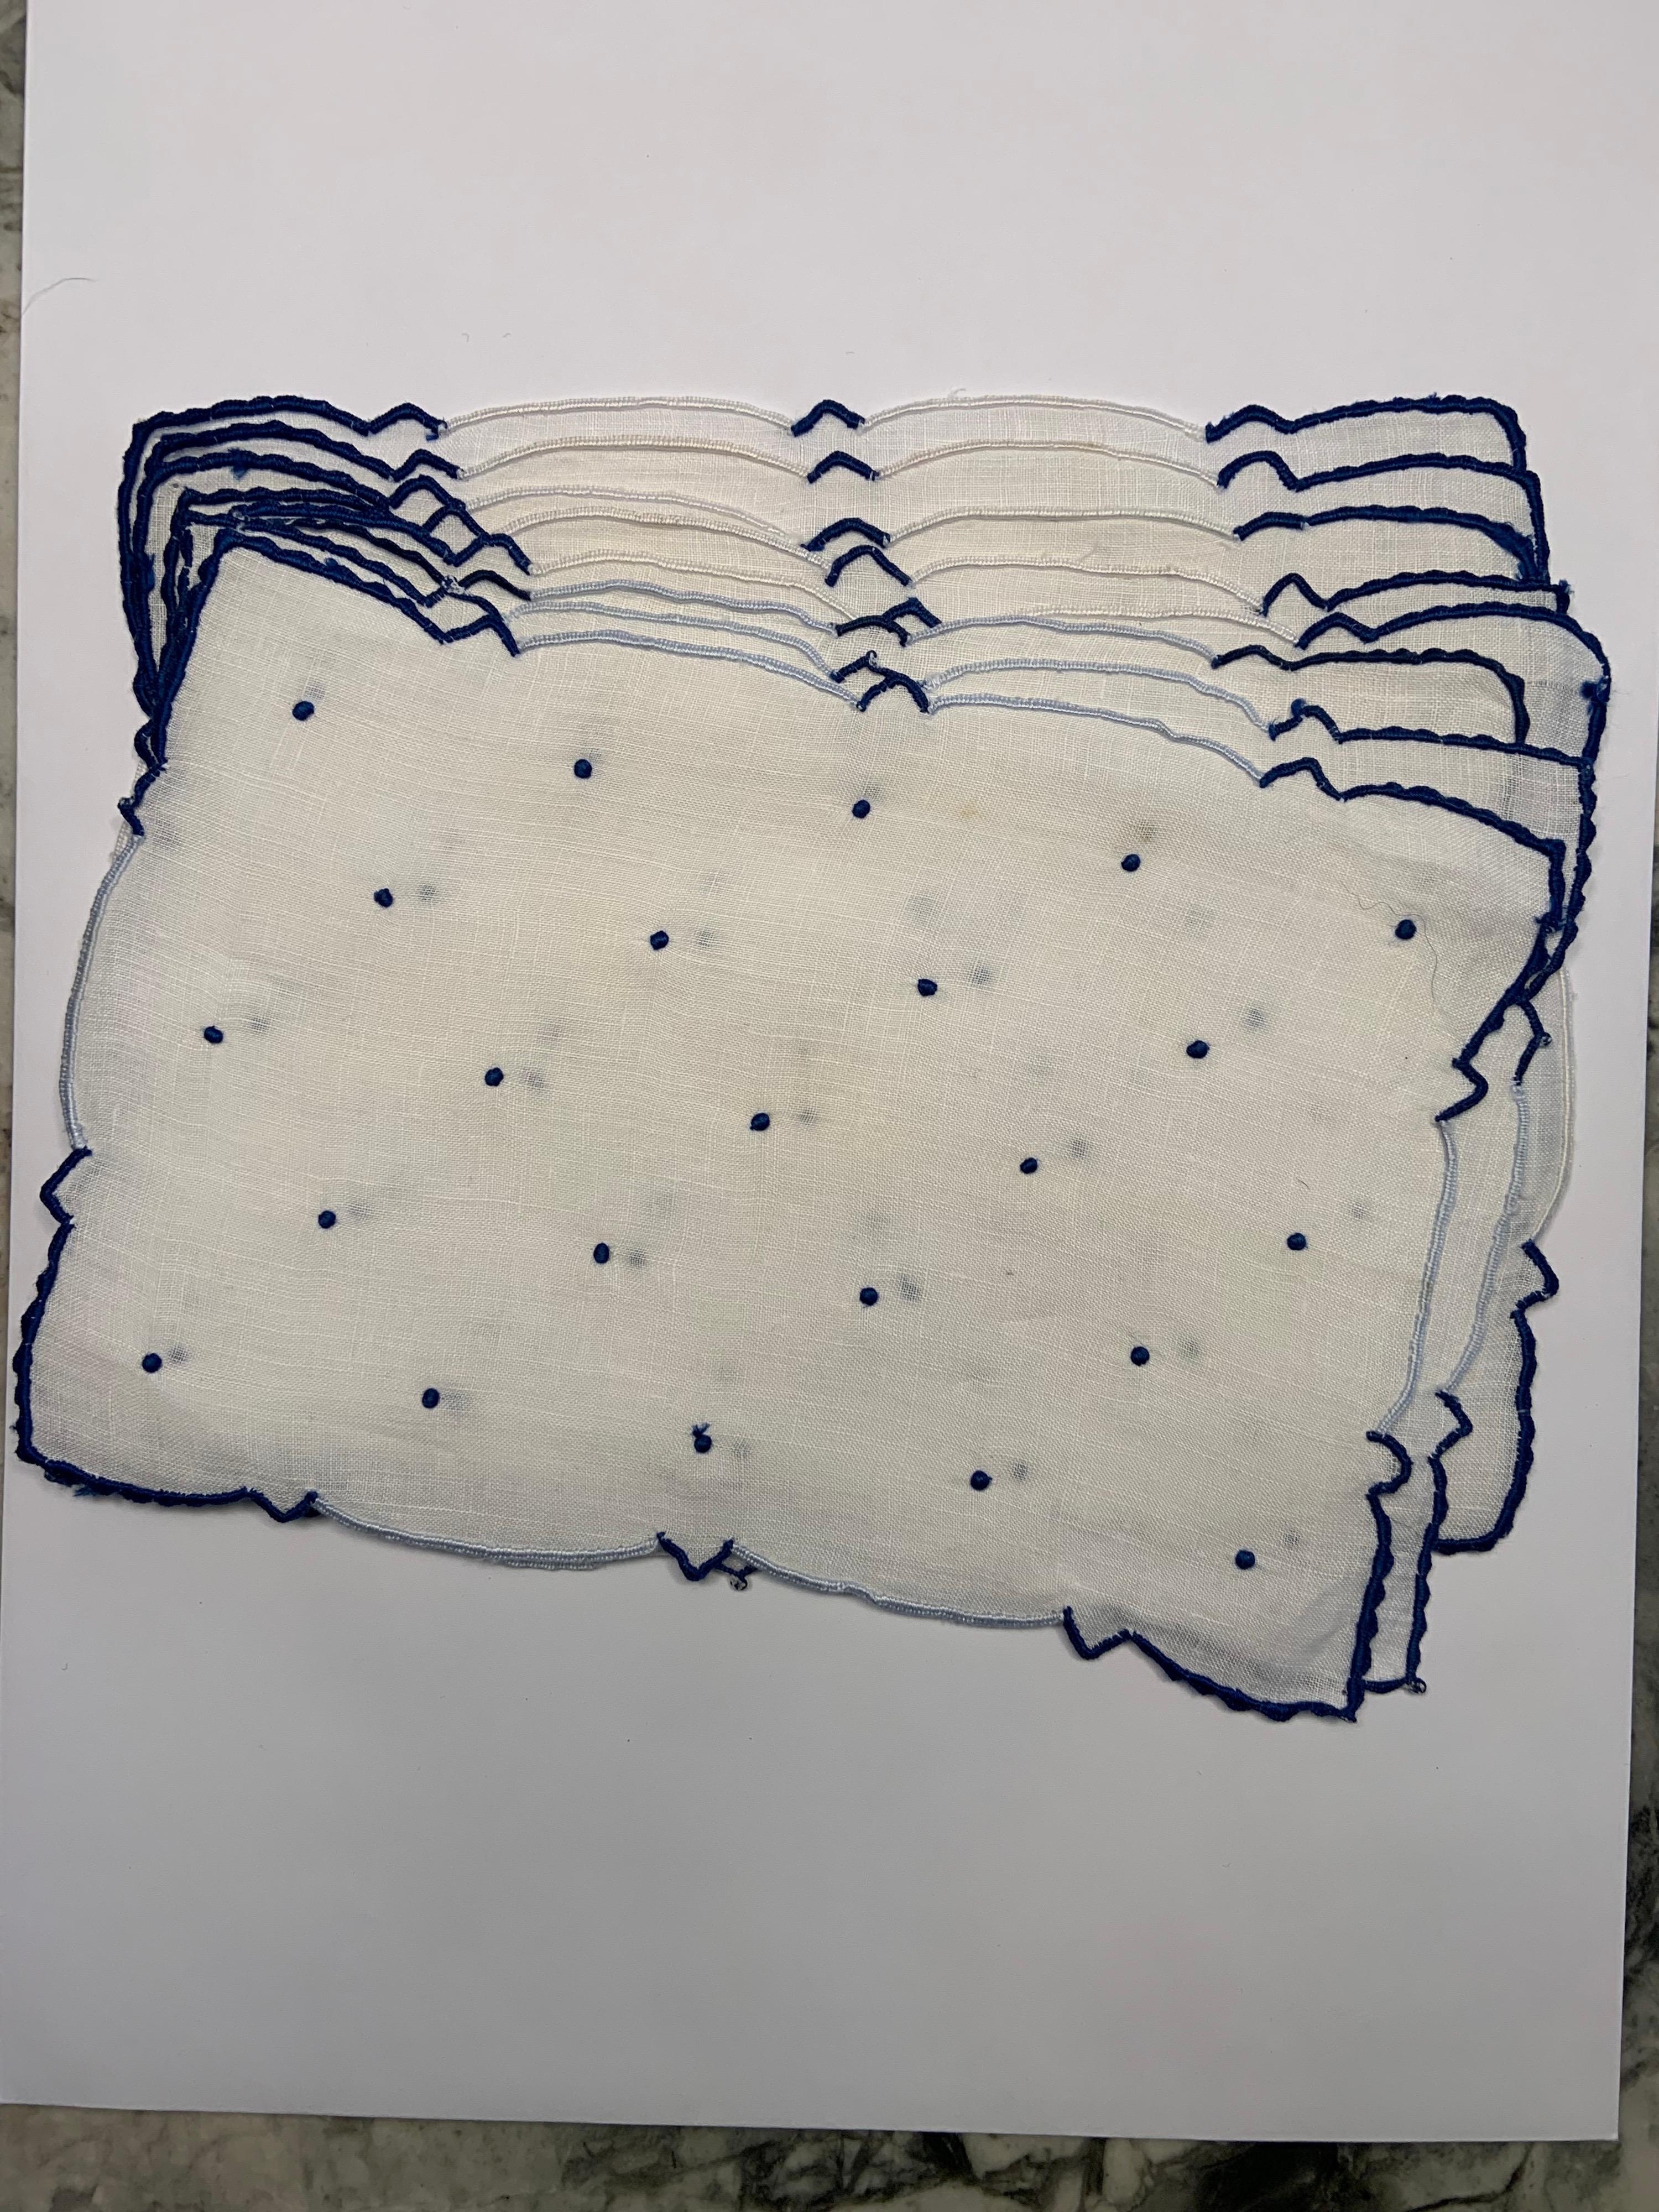 These white linen cocktail napkins have navy blue and white embroidered edges and navy blue embroidered dots in the center. Navy and white is a classic look. They are in excellent condition.